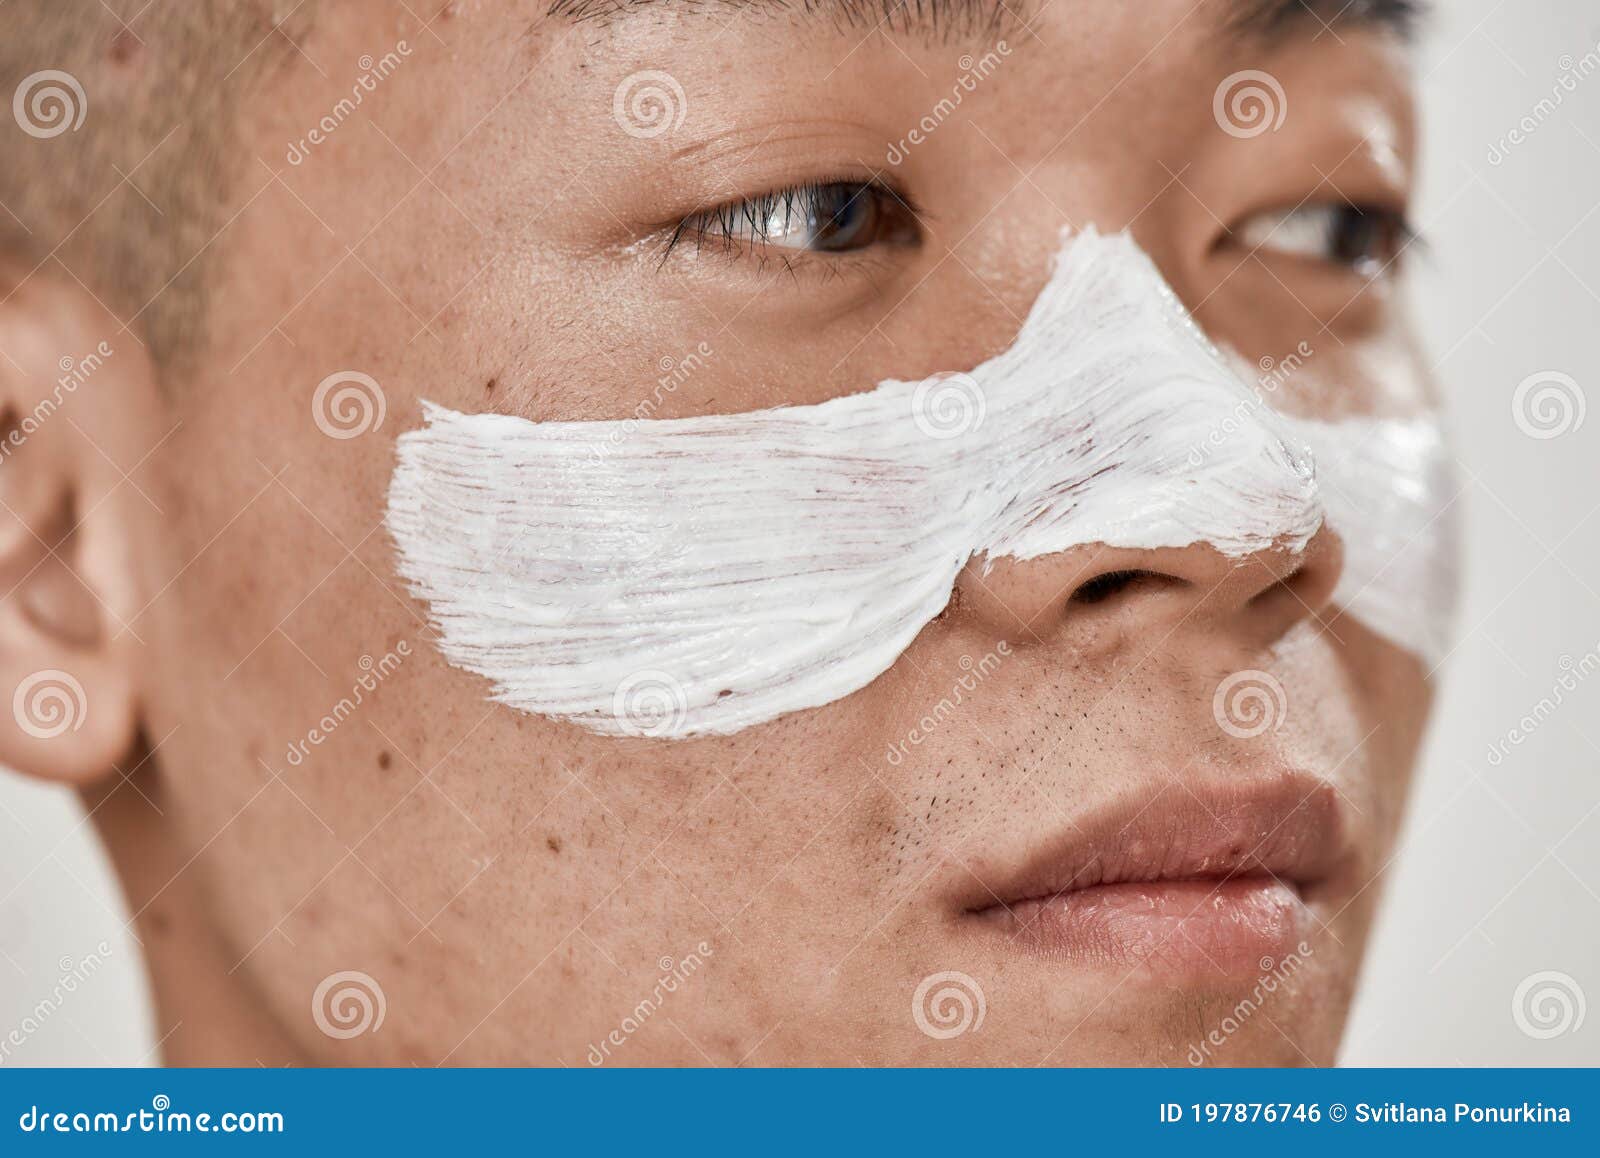 close up of face of young asian man with problematic skin and hyperpigmentation applied mask on his face, looking away